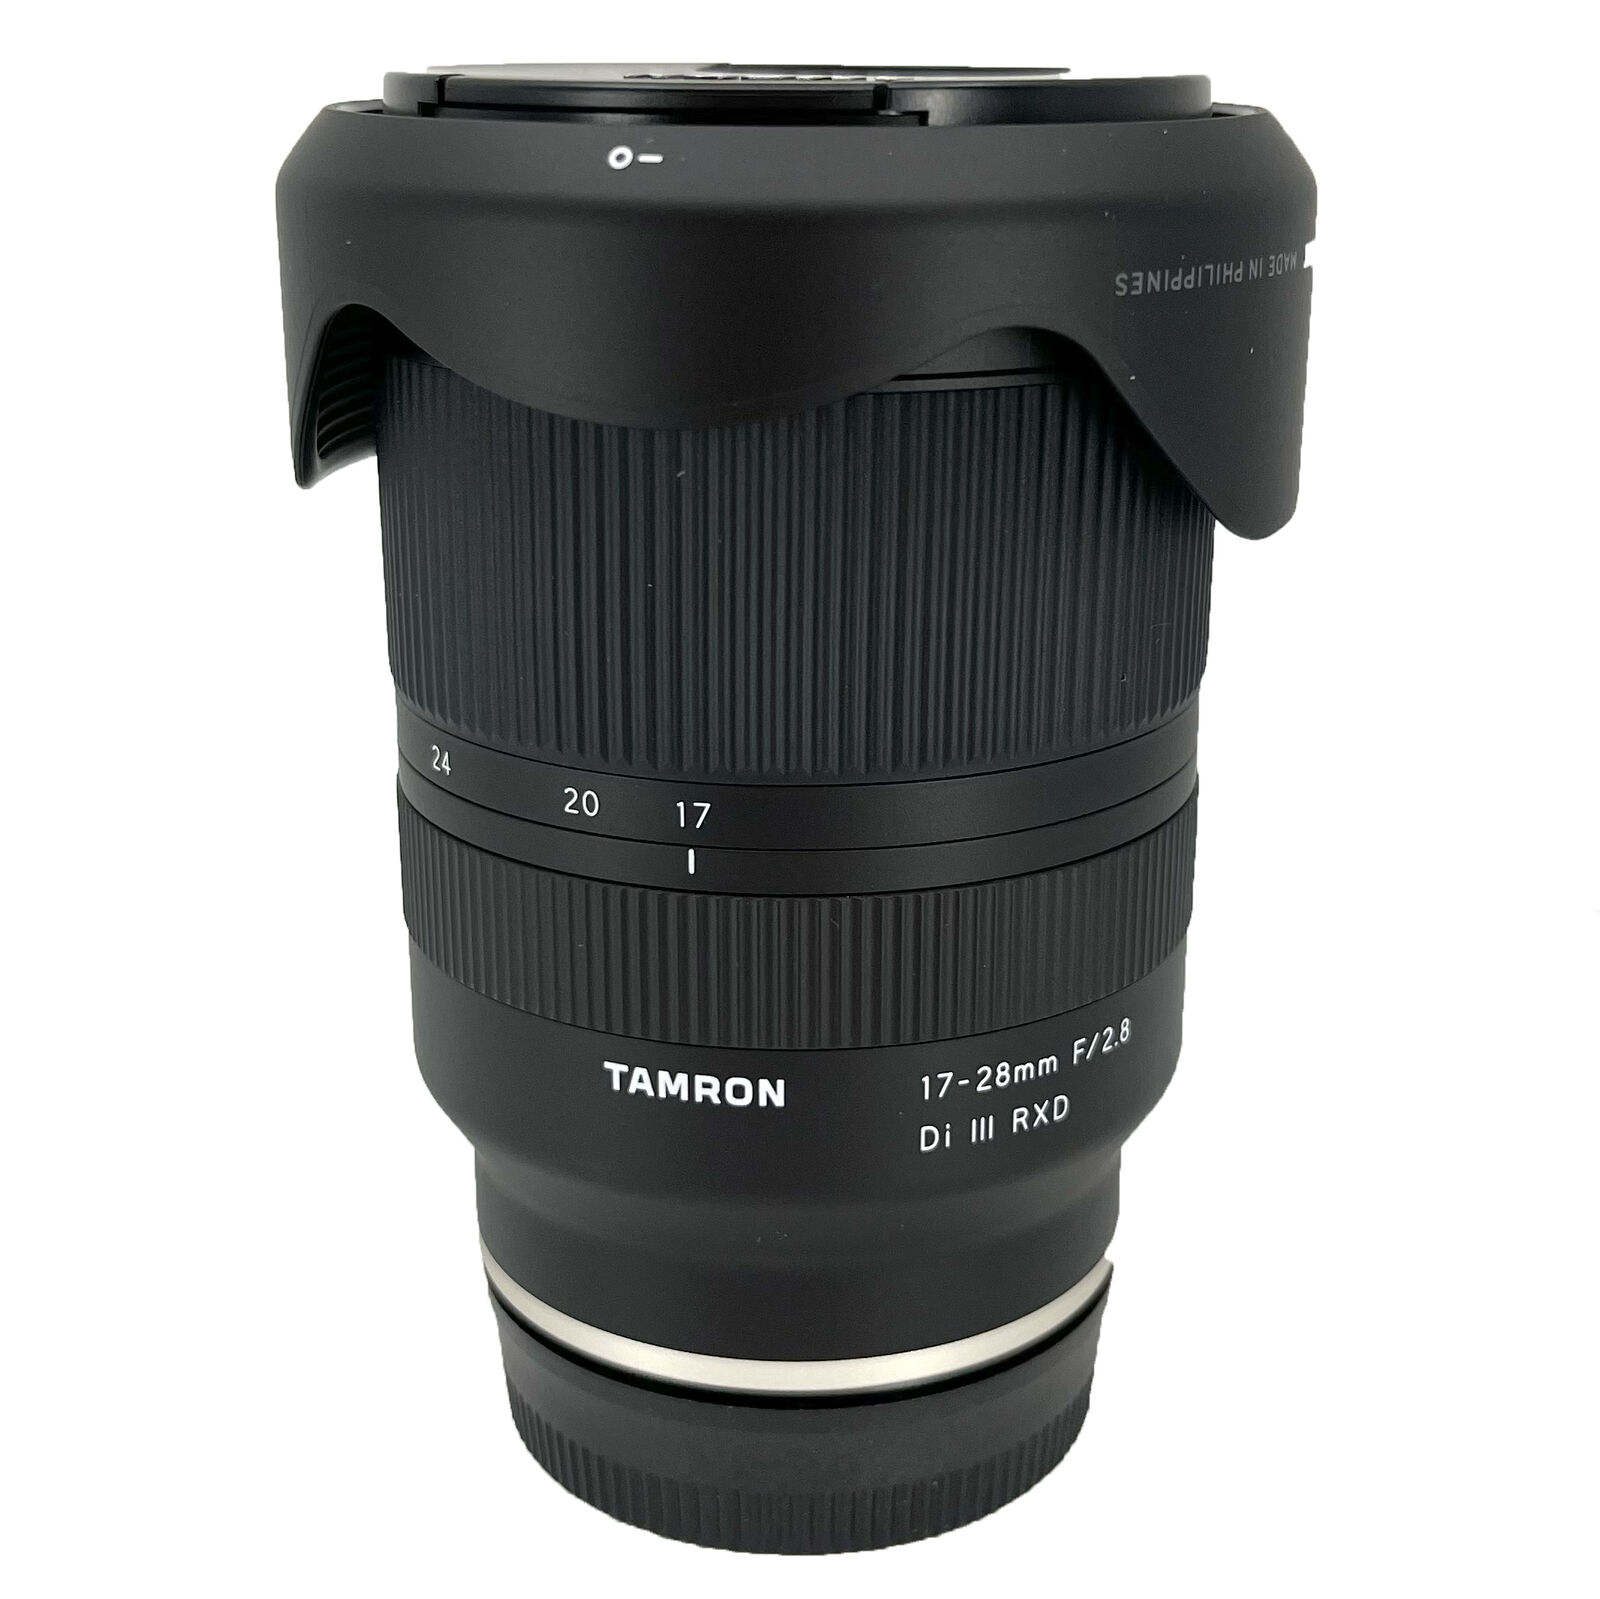 Tamron+17-28mm+f%2F2.8+DI+III+RXD+Wide+Angle+Camera+Lens for sale 